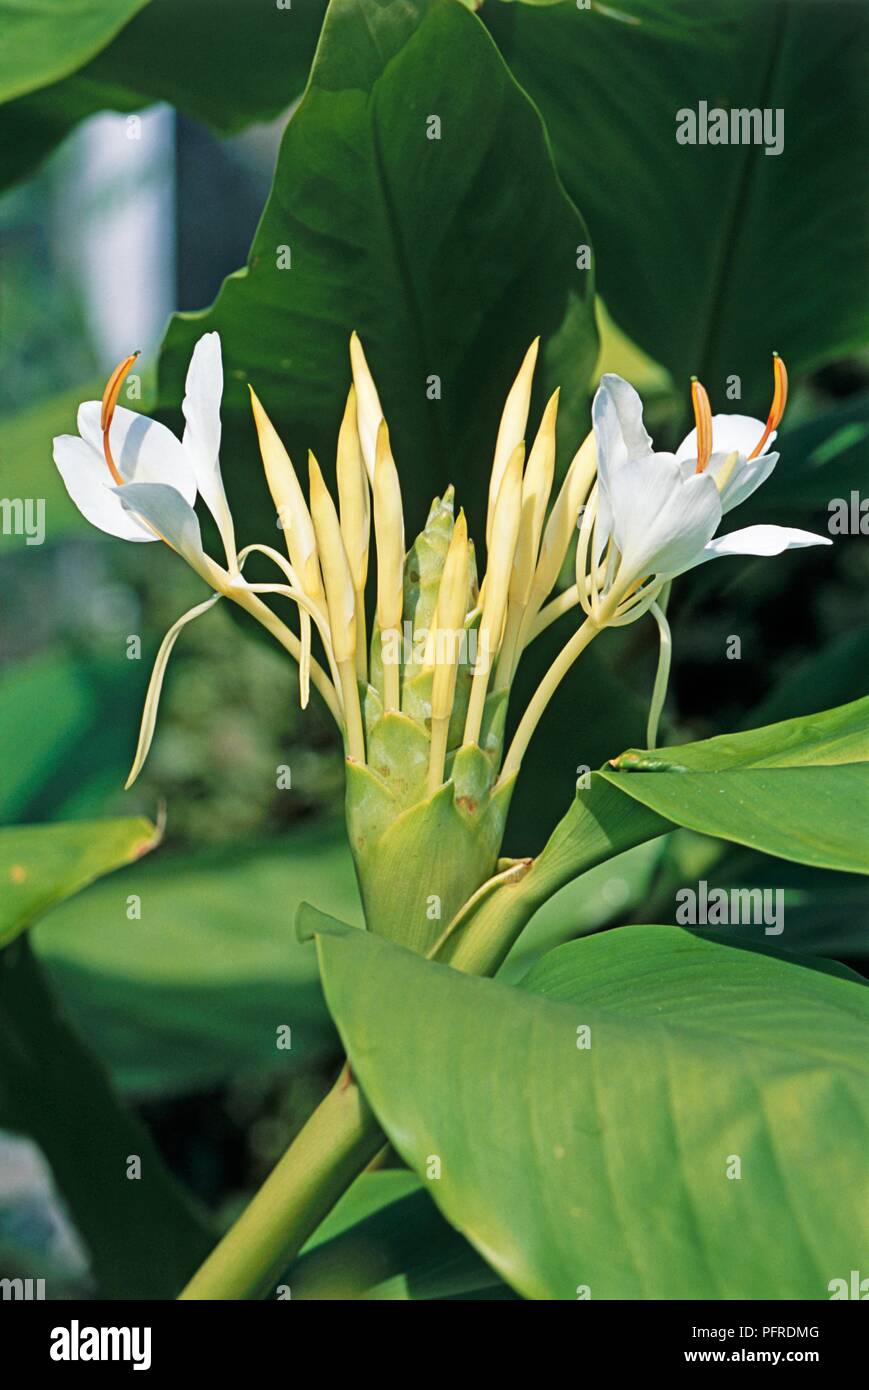 Hedychium coronarium (White ginger lily), flowers and leaves, close-up Stock Photo